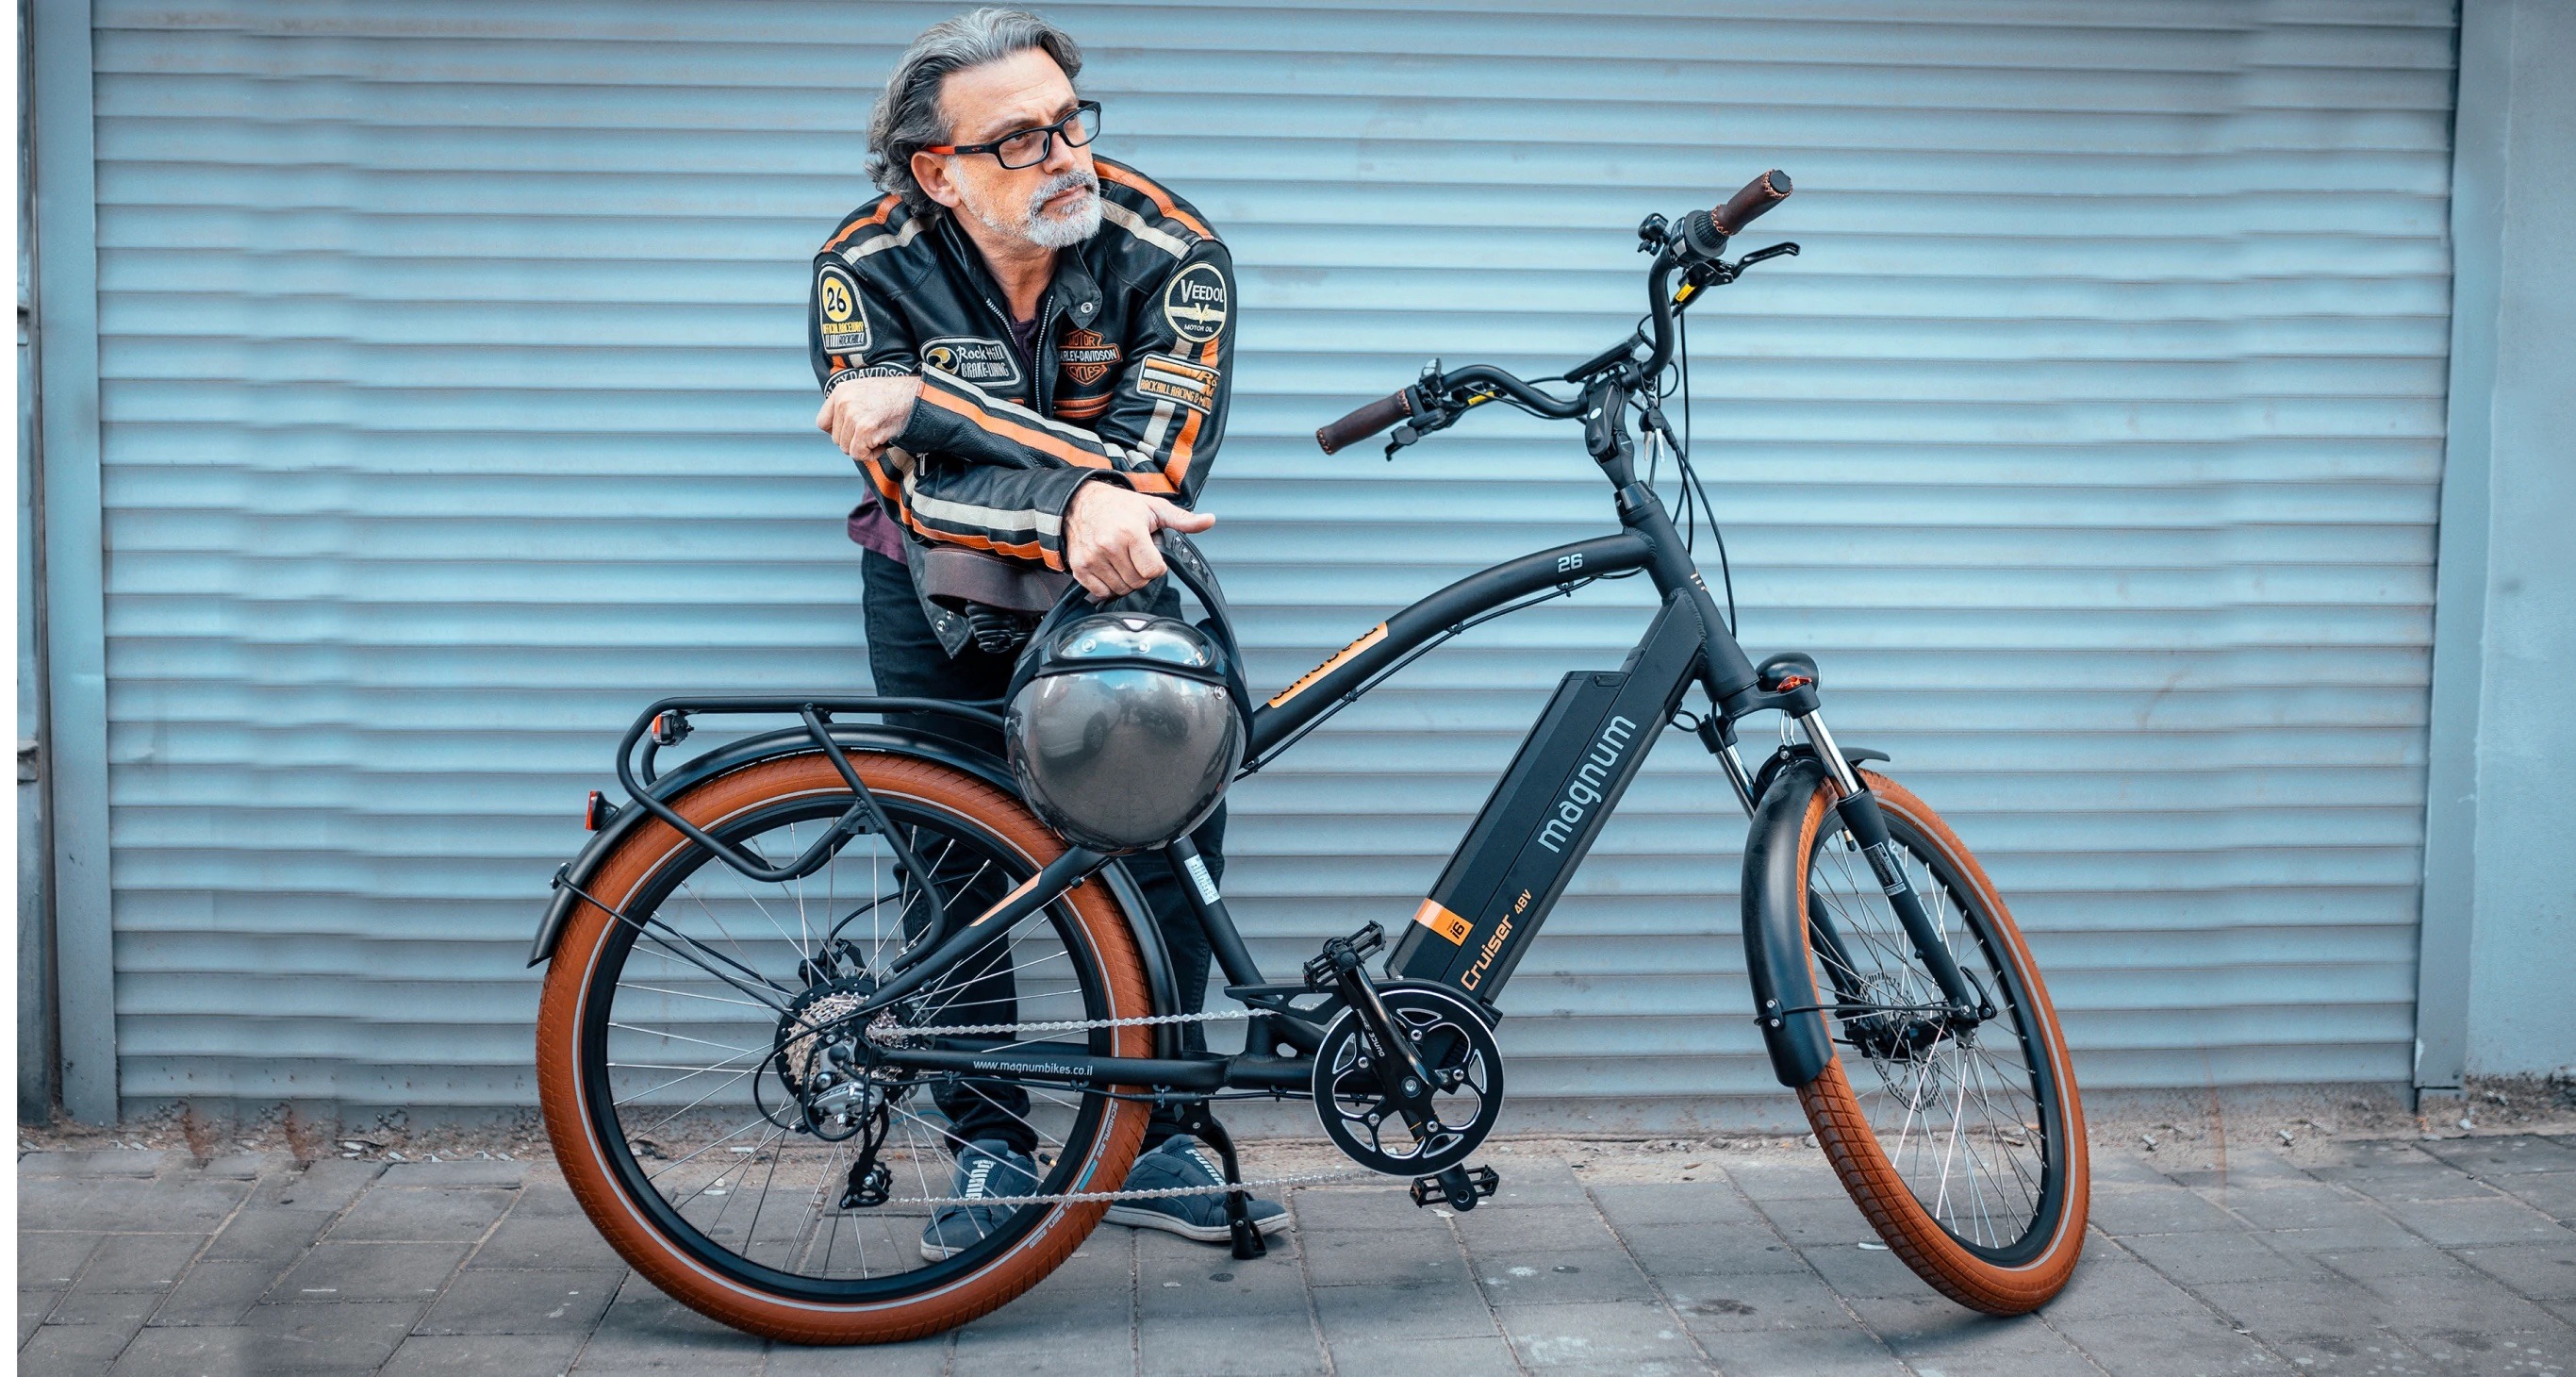 Man with gray hair and goatee wears a black and orange motorcycle jacket and leans over a Magnum Cruiser electric bike